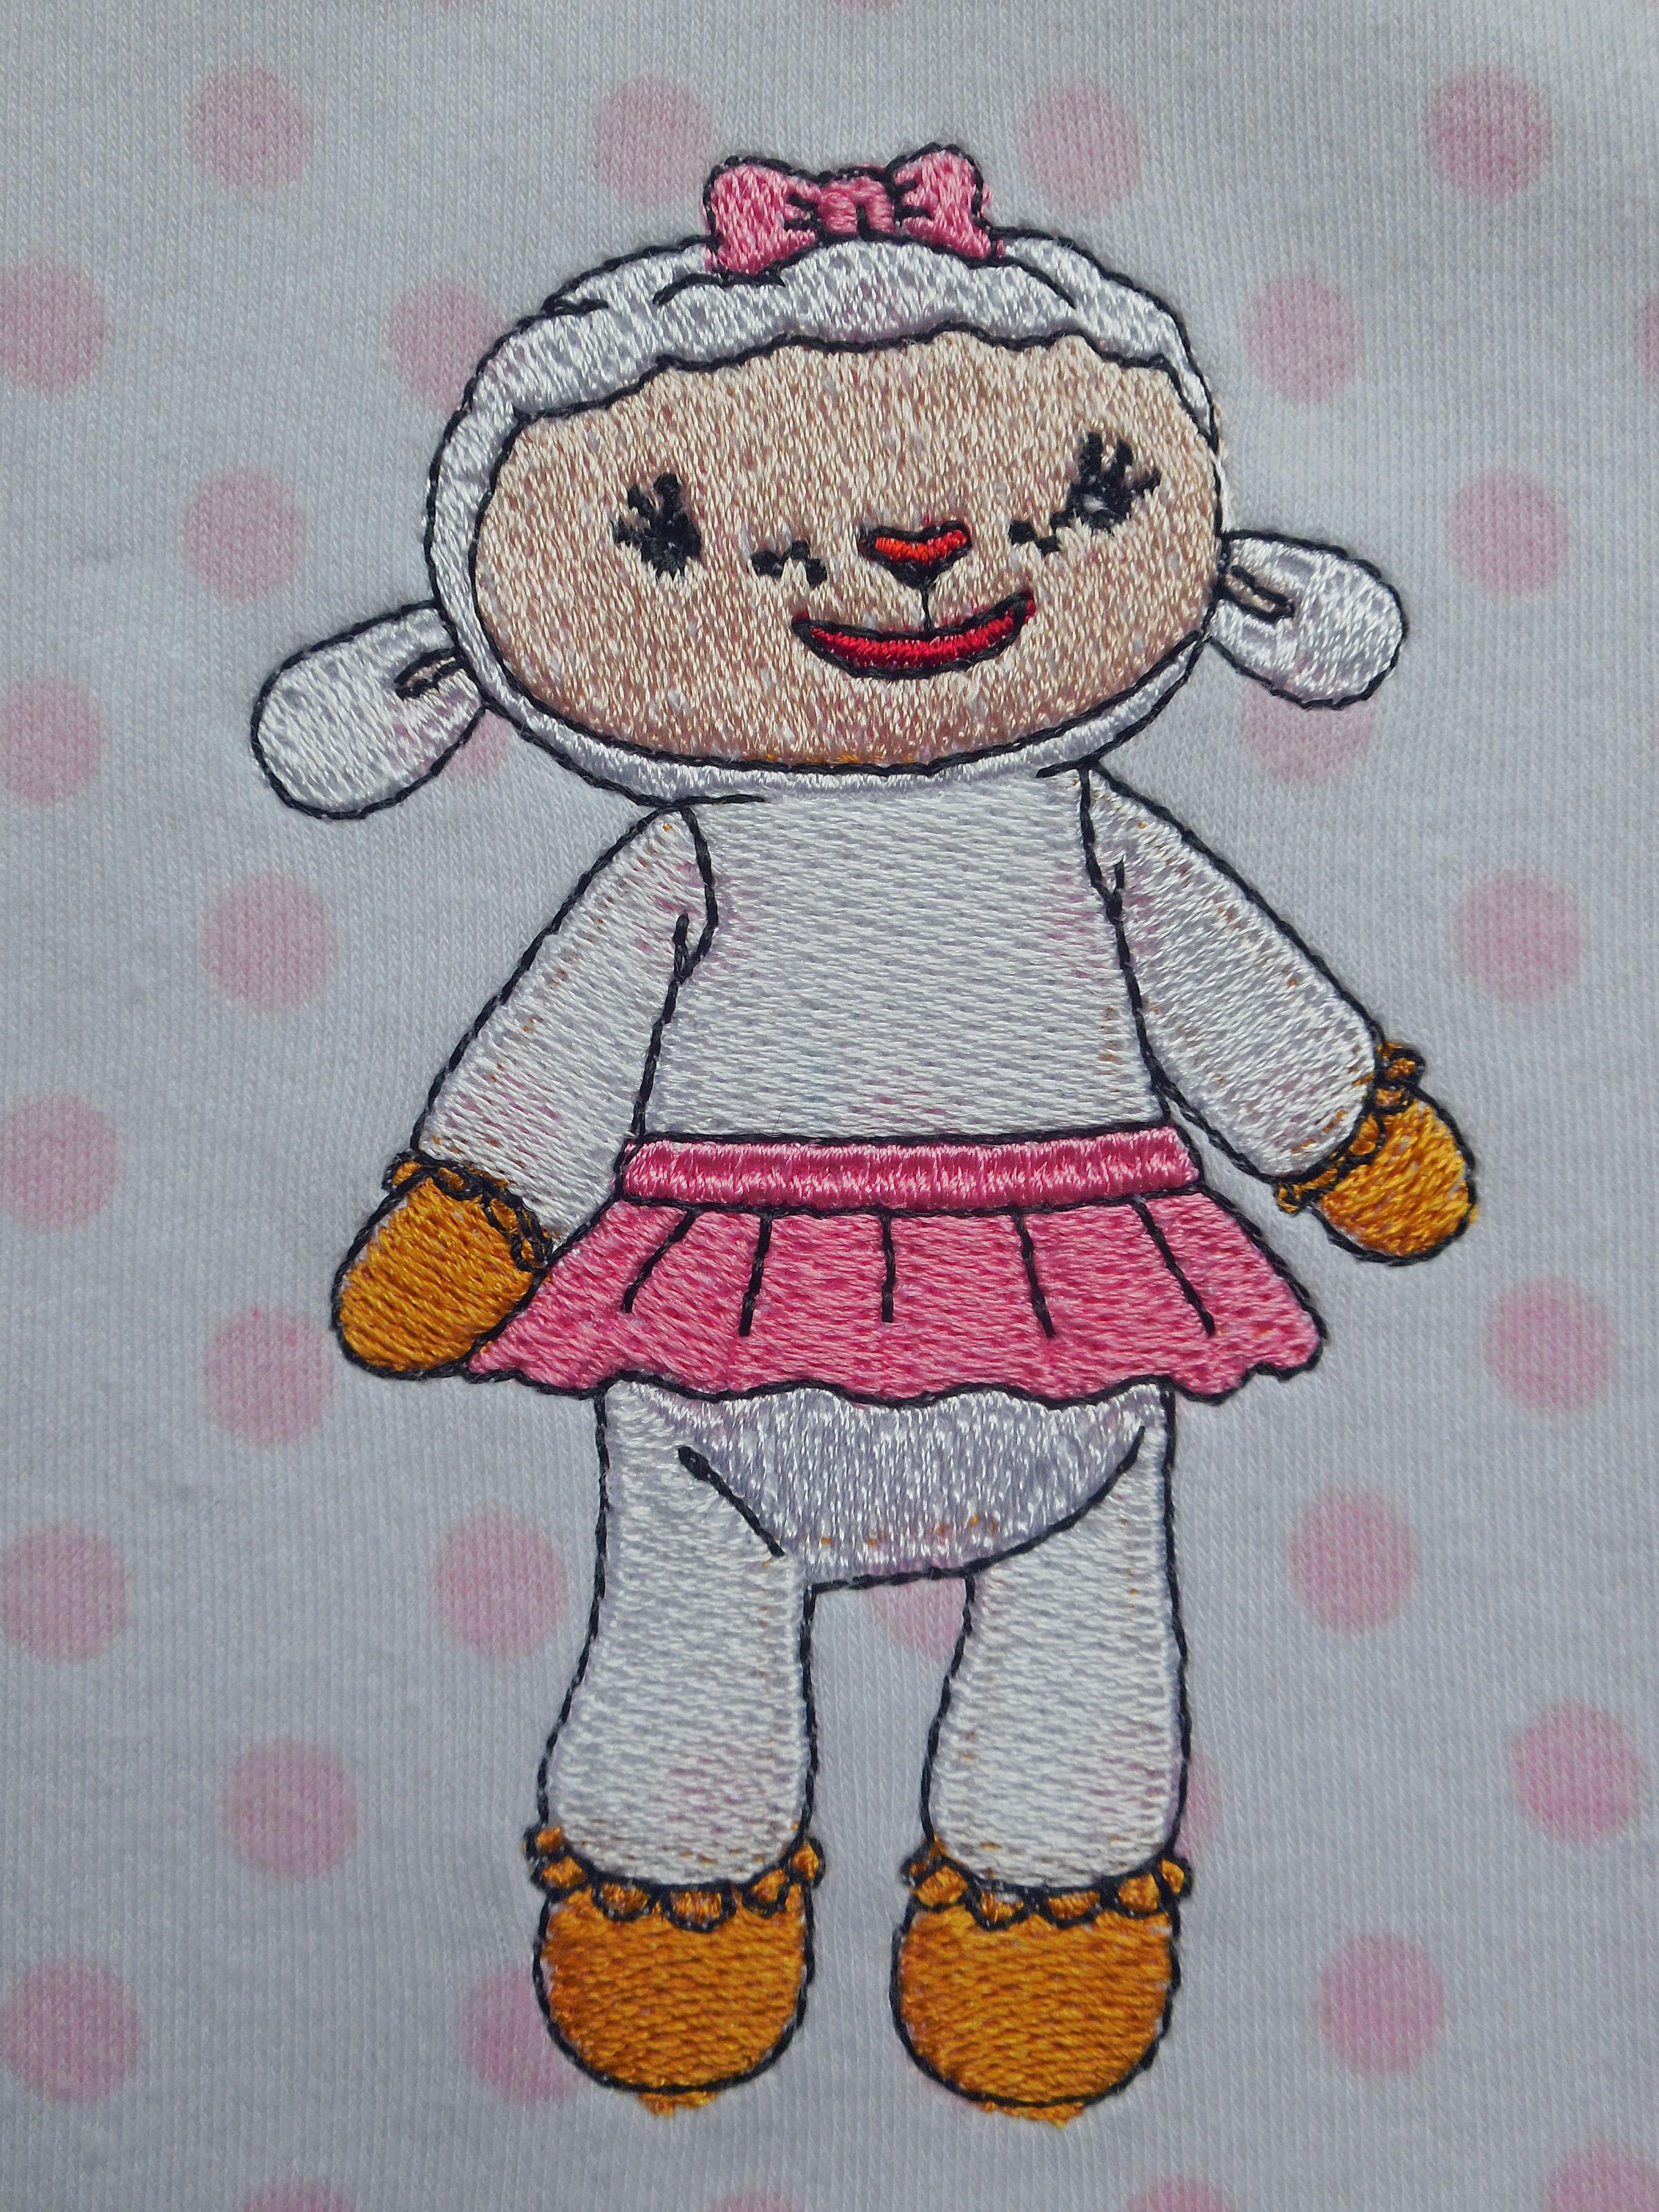 Kids' pajamas with Lambie the sheep embroidery design from Doc McStuffins Series